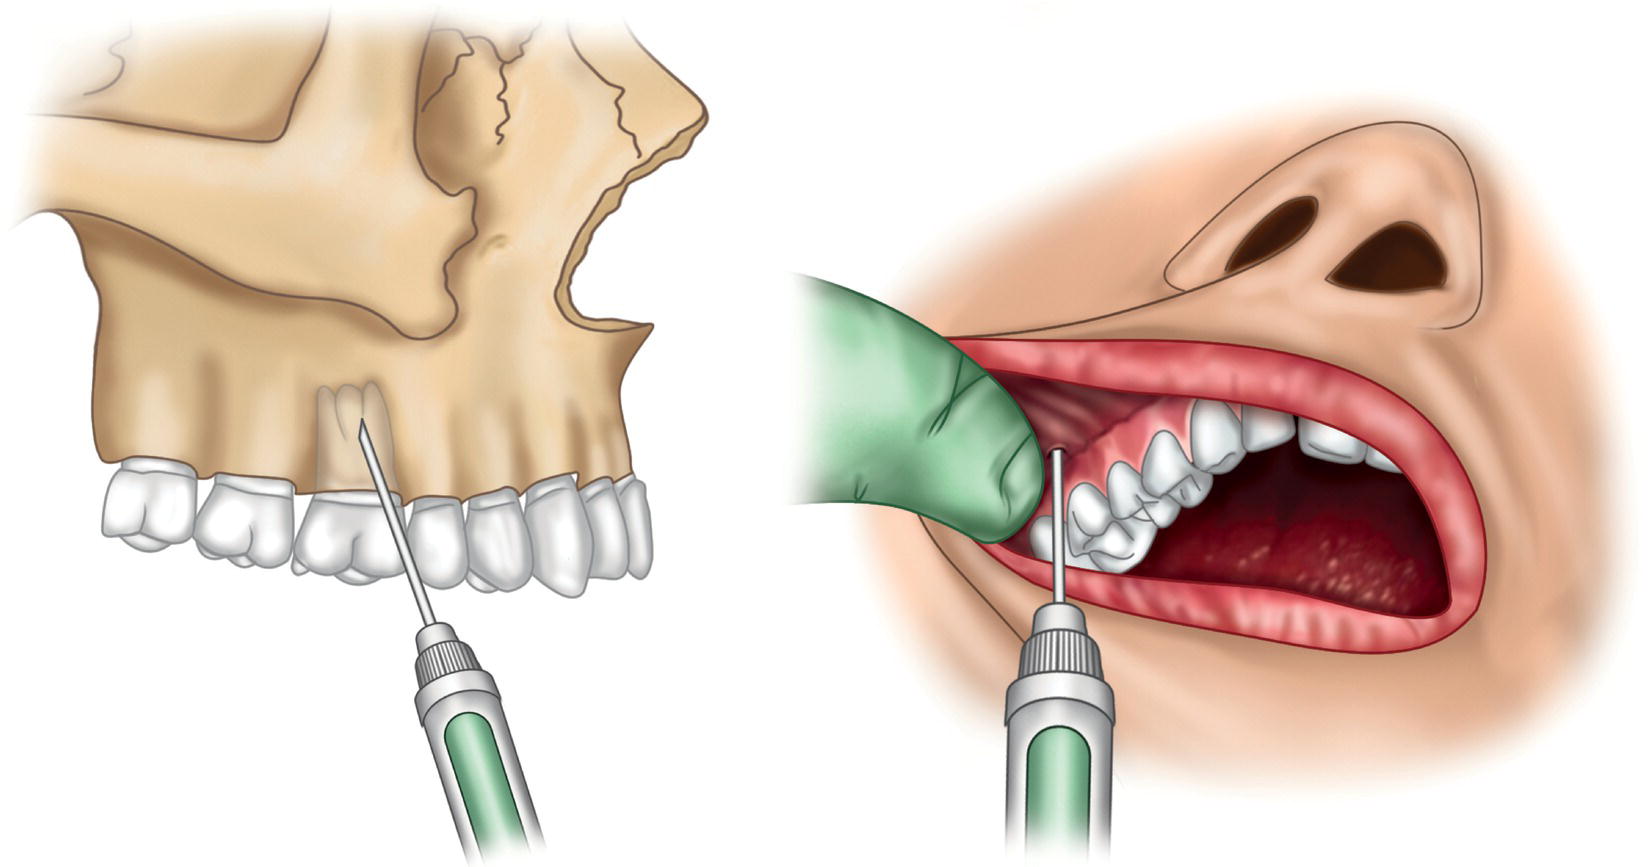 Two illustrations of the insertion of needle along the mucogingival junction in the molars of a skull and a human.